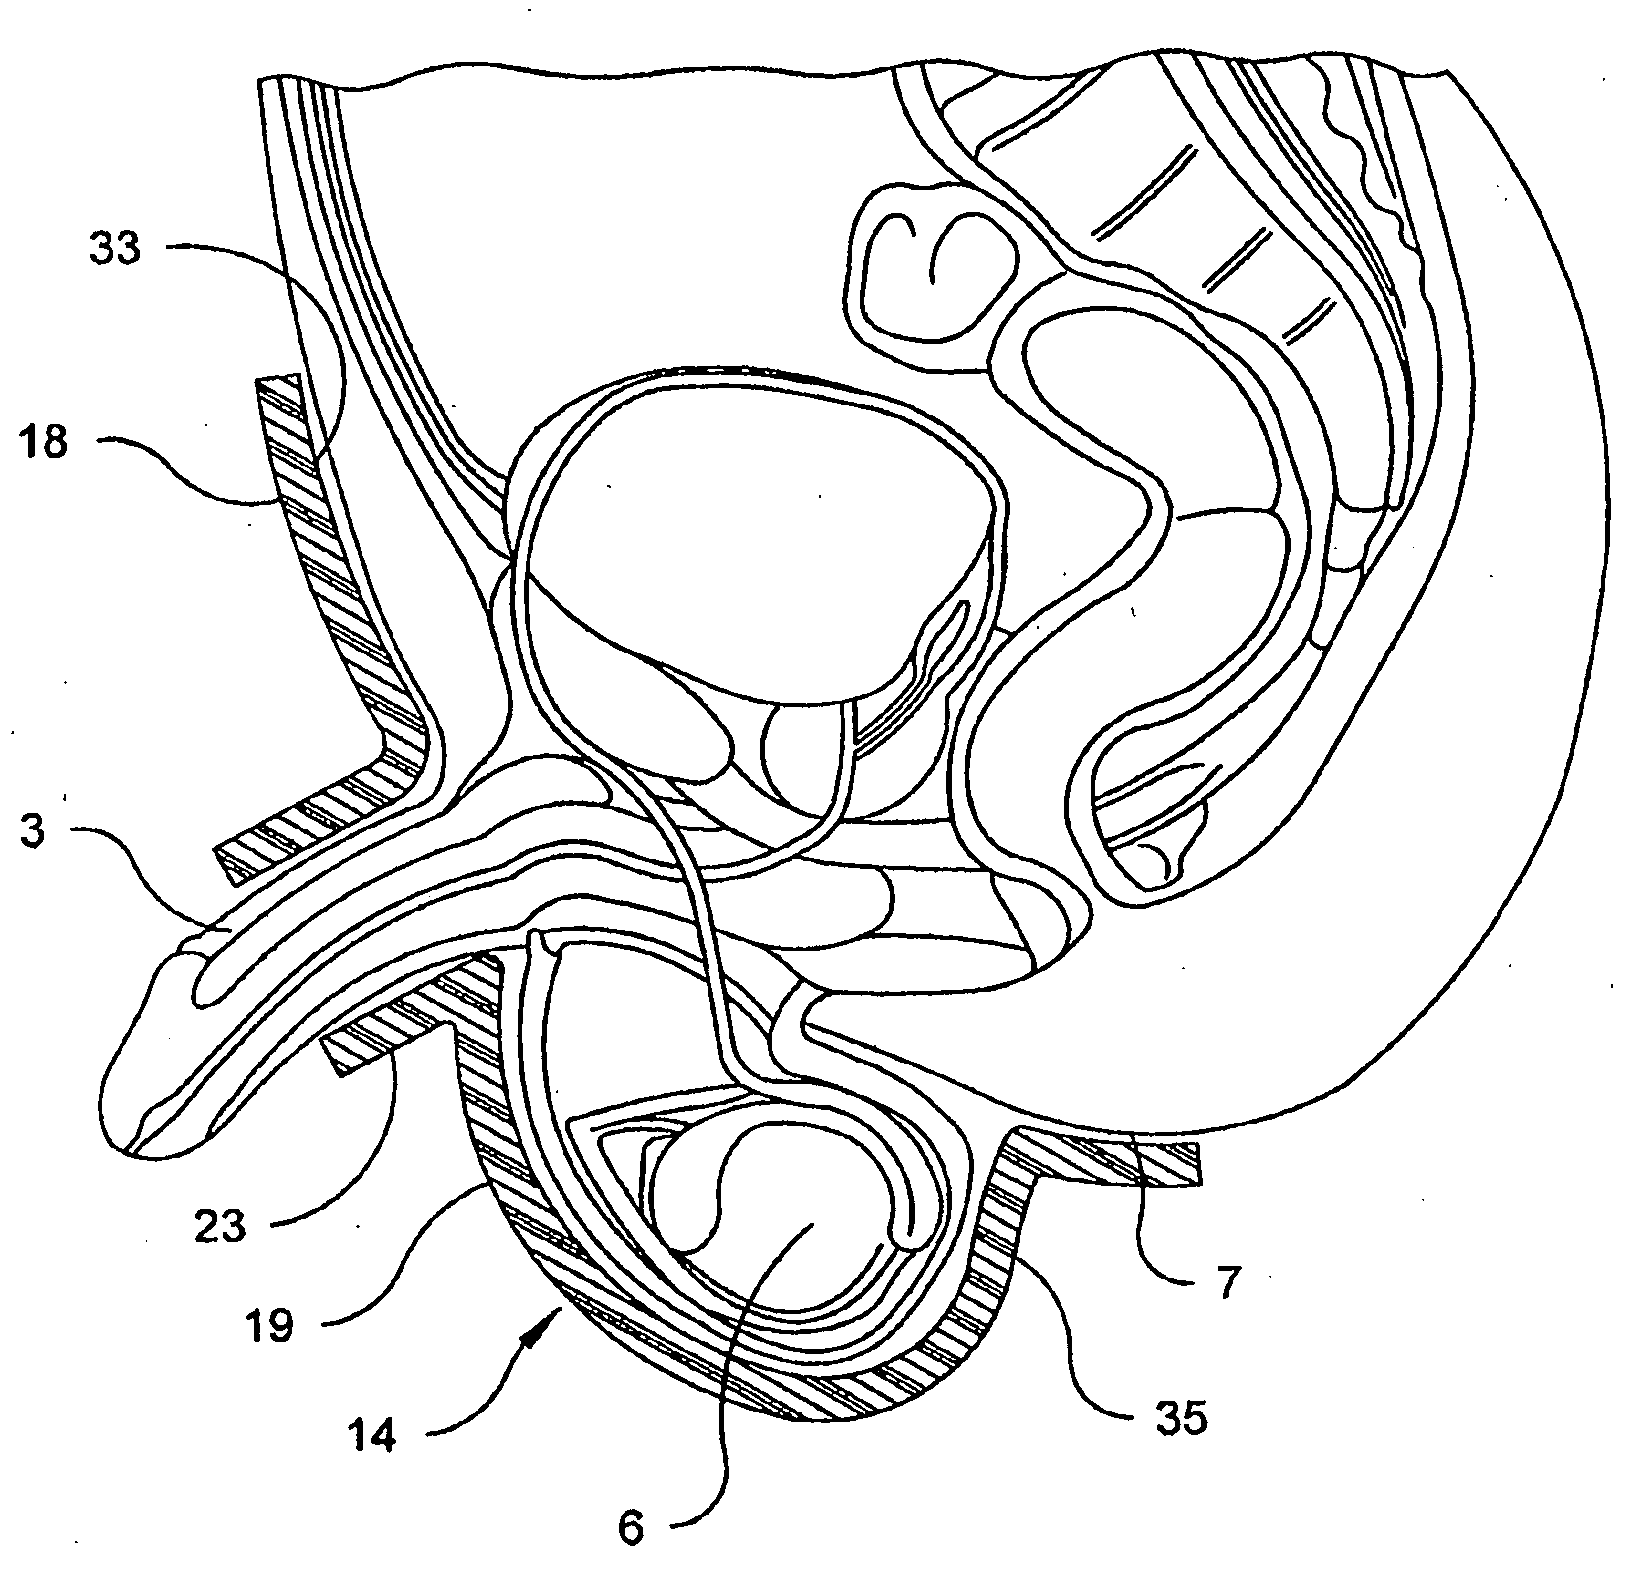 Therapeutic device for thermally assisted urinary function